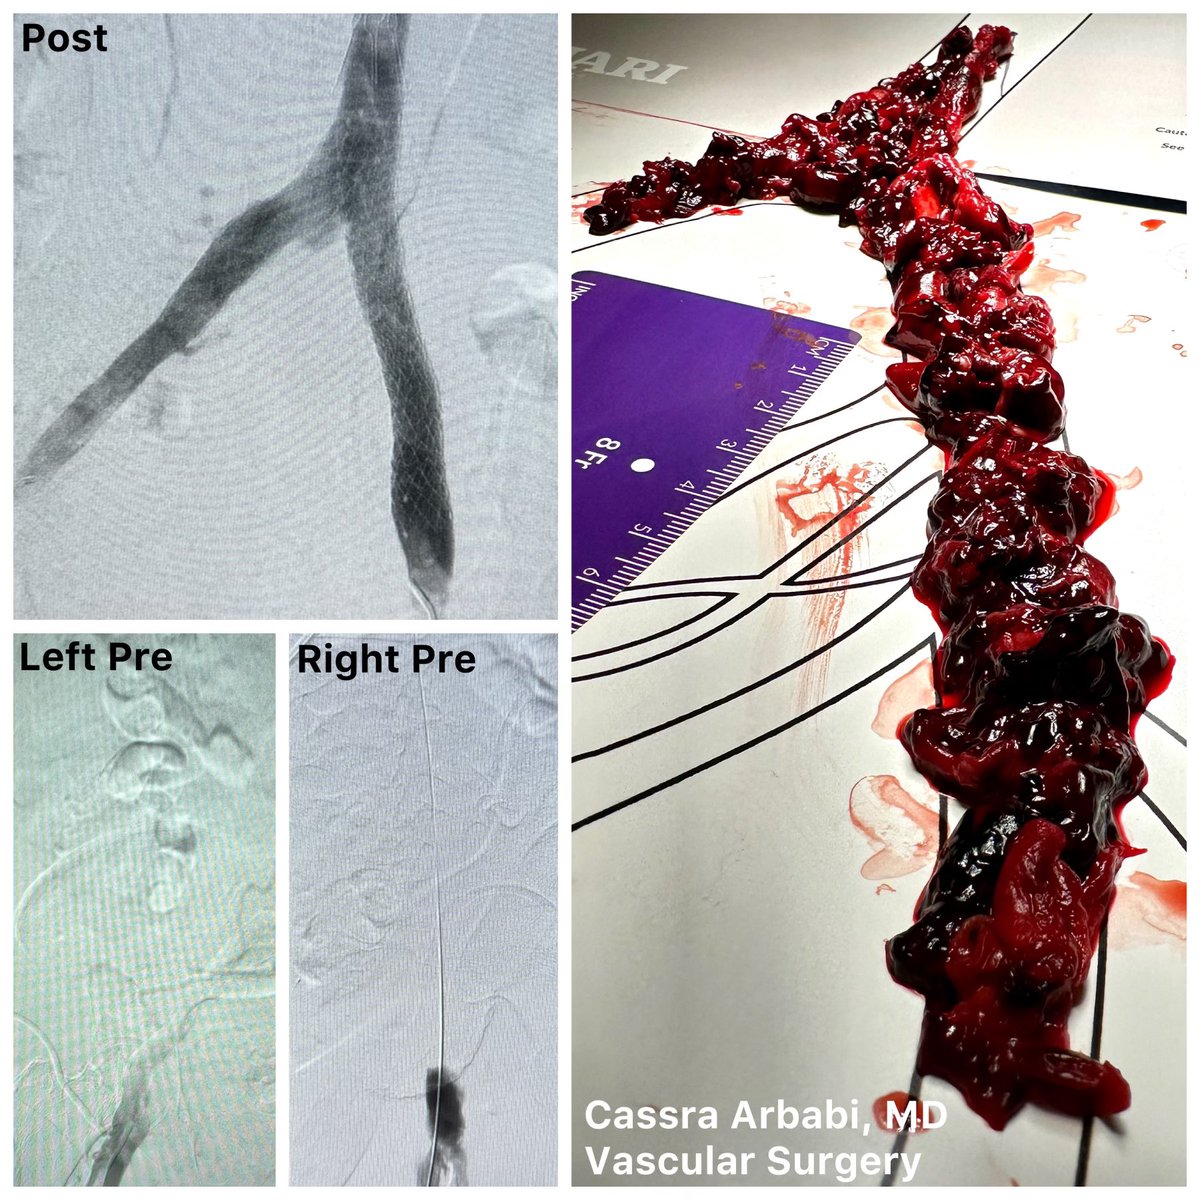 Acute IVC/BL iliofem #DVT. Has non retrievable IVCF for 30+ yrs. Not on AC. Treated w both flowtriever+clottriever, followed by kissing stents, massive clot burden removed. Doing well several months post op. Tiny chronic residual clot in IVCF, now on AC. #vascular @kevinsealsmd